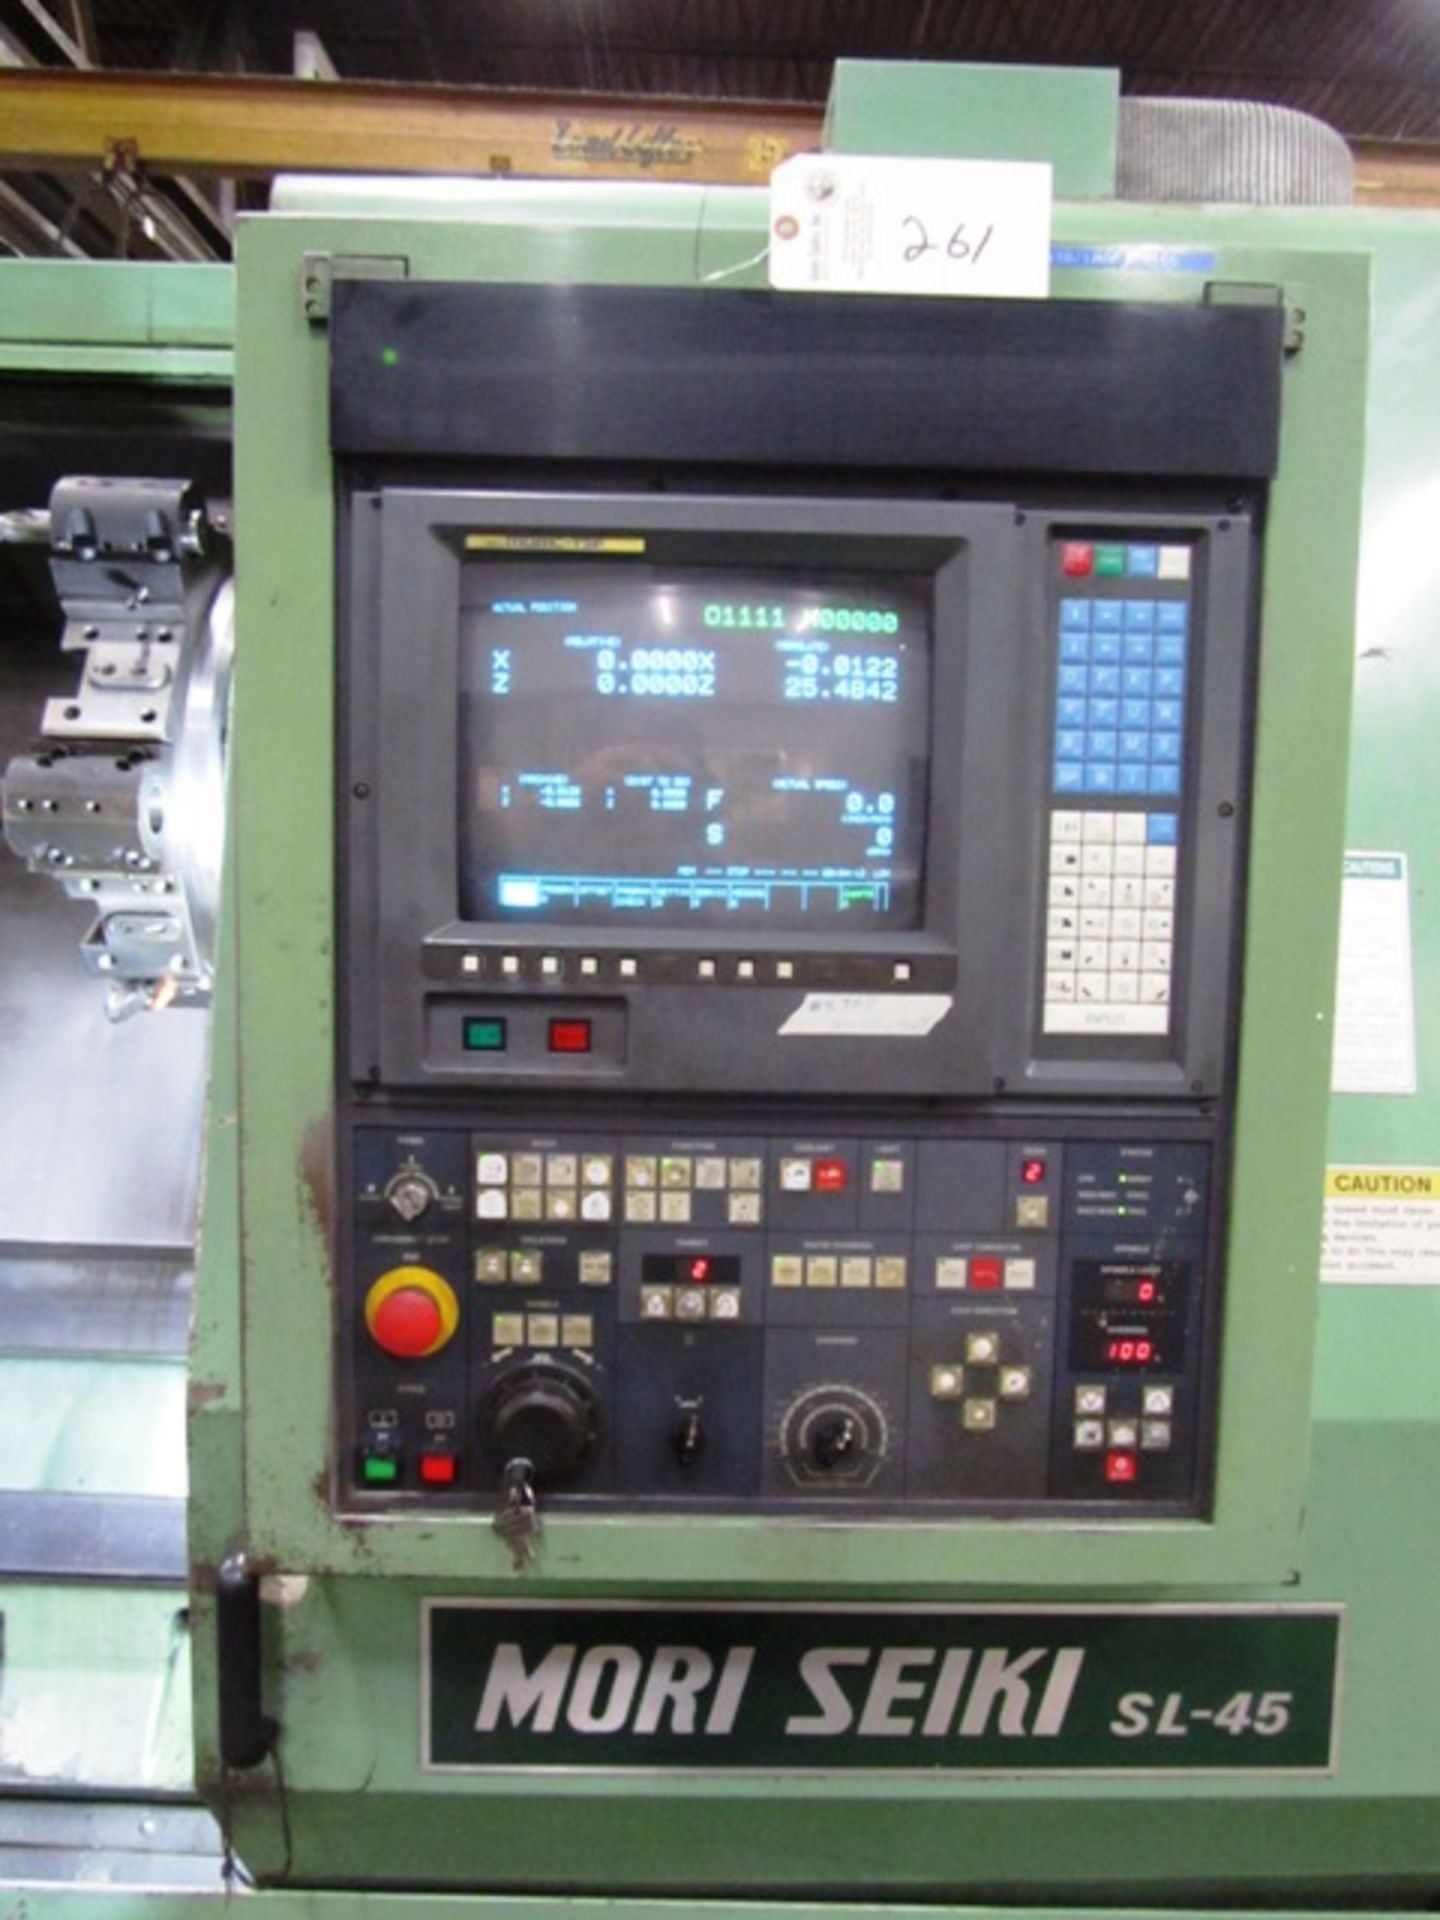 Mori Seiki SL-45B/1000 CNC Turning Center with 15'' 3-Jaw Chuck, 26.4'' Swing Over Bed, 46.5'' - Image 2 of 4